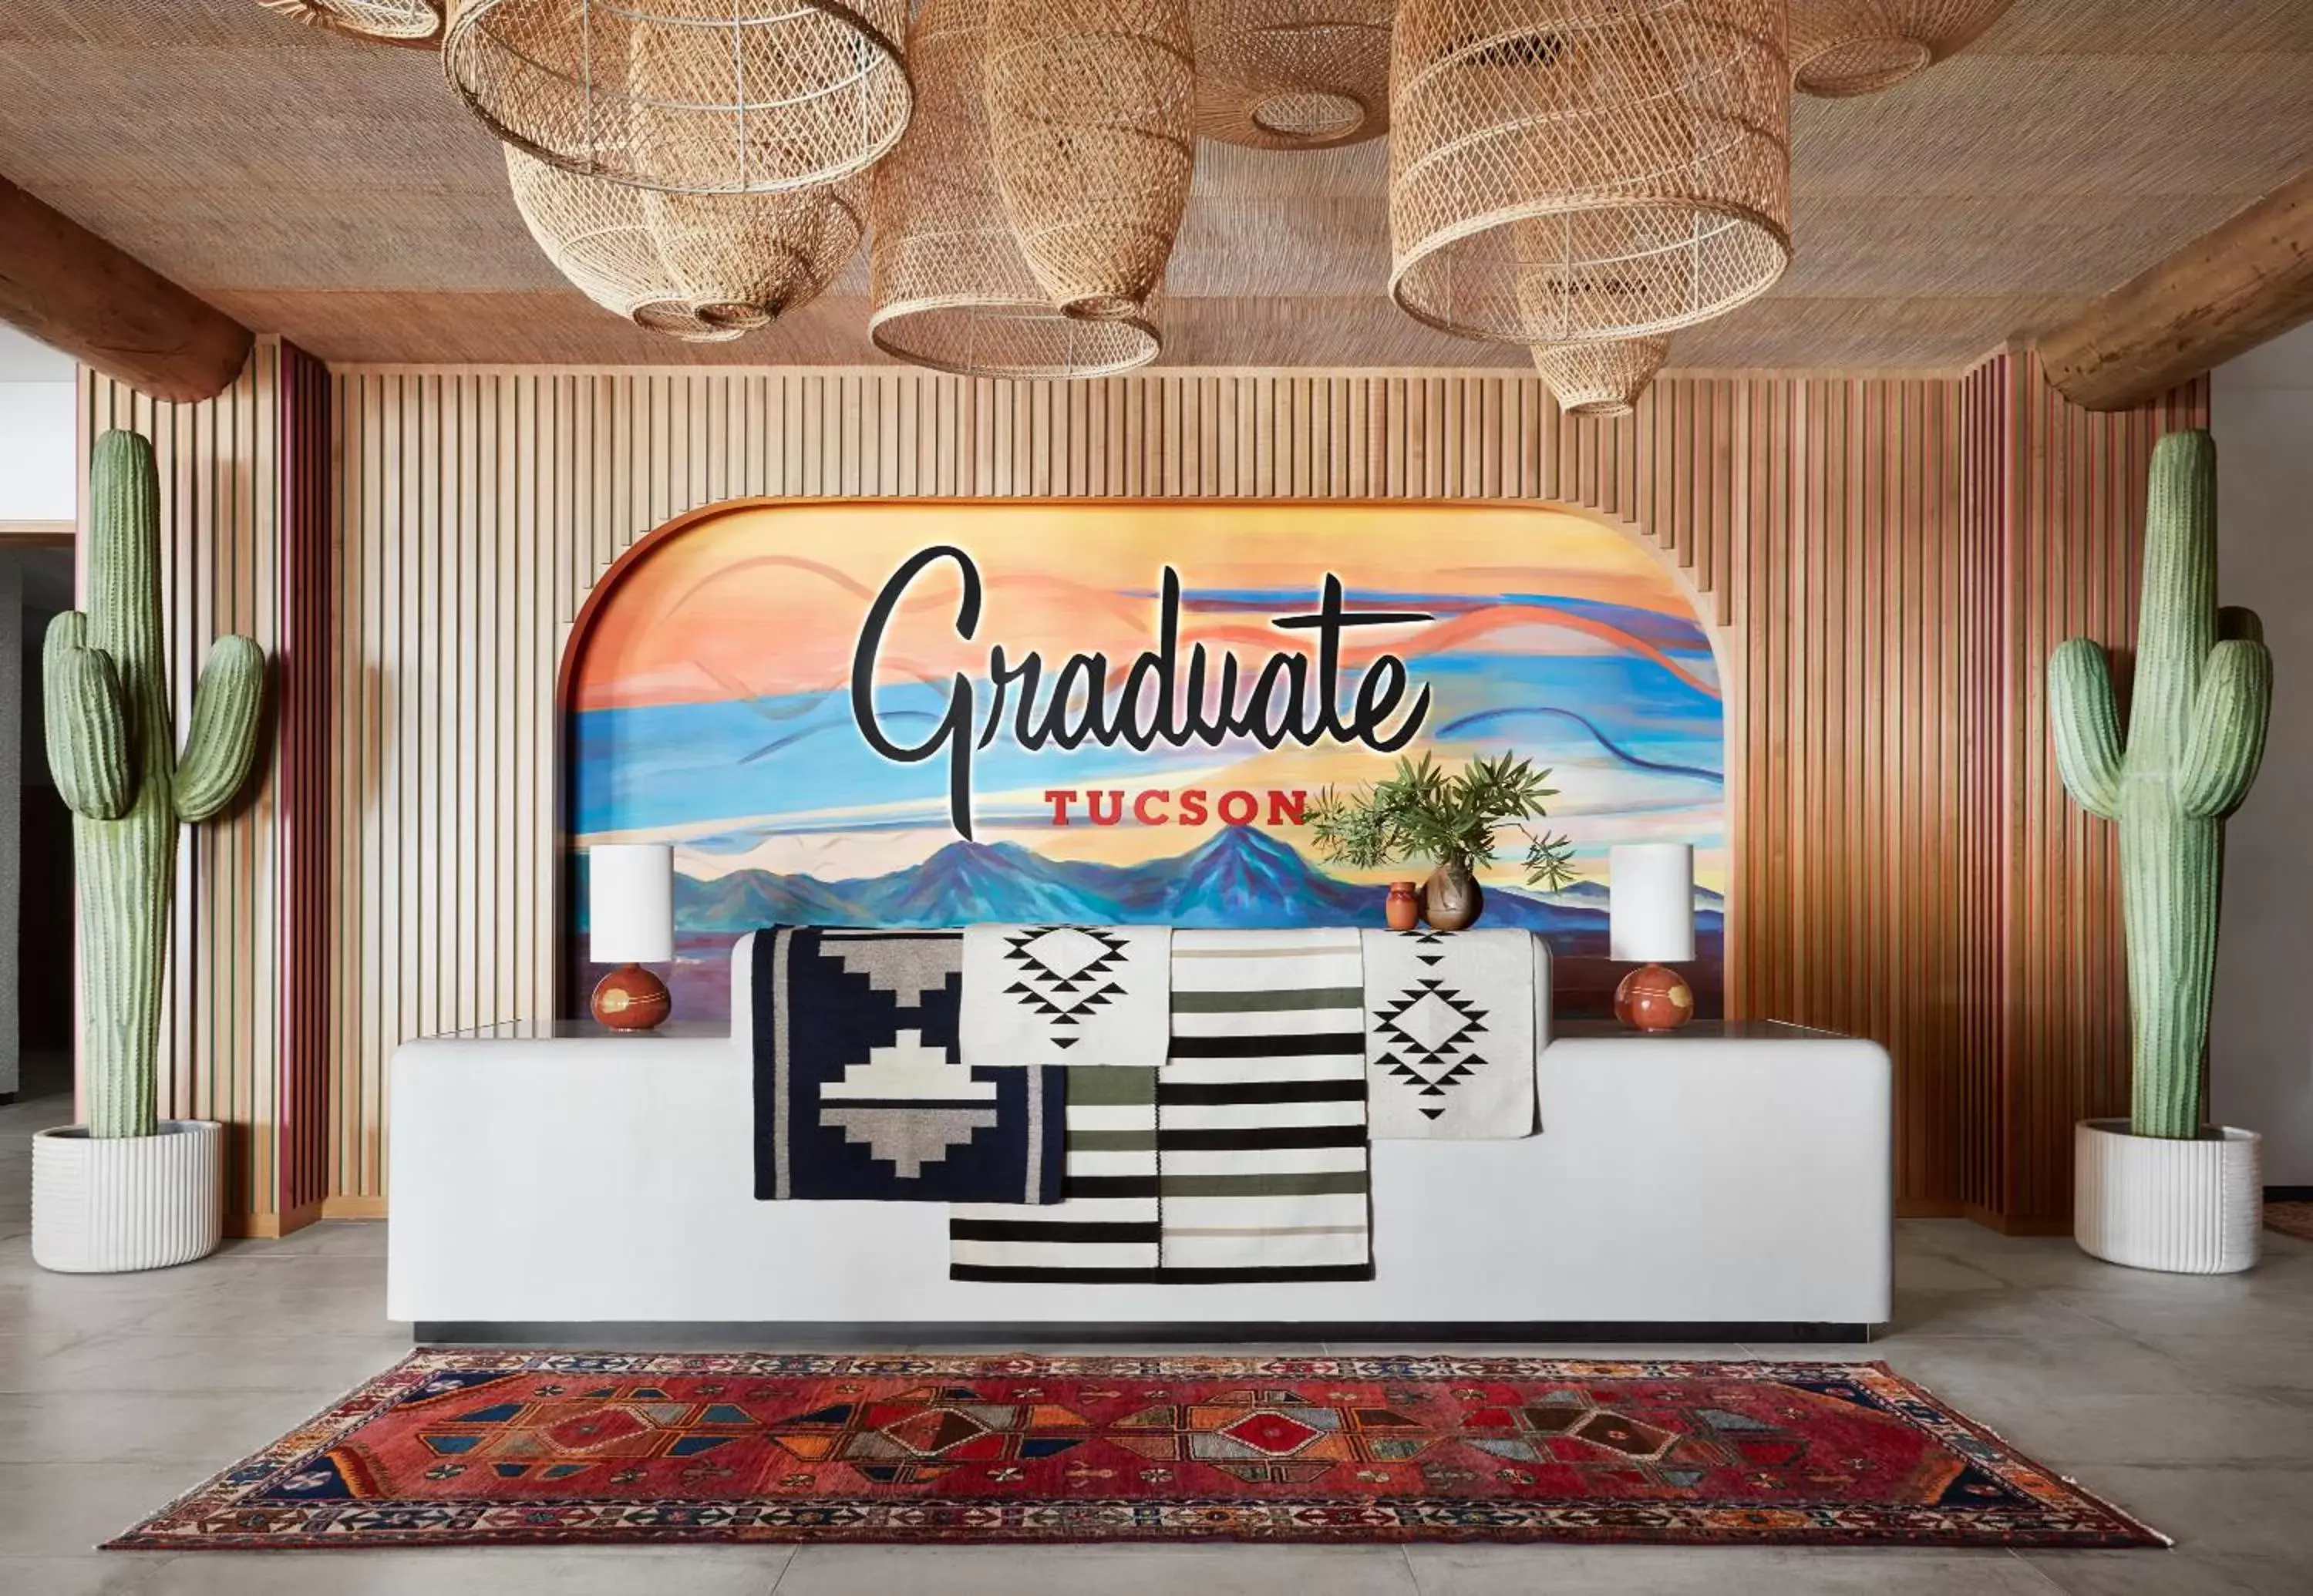 Lobby or reception, Logo/Certificate/Sign/Award in Graduate Tucson